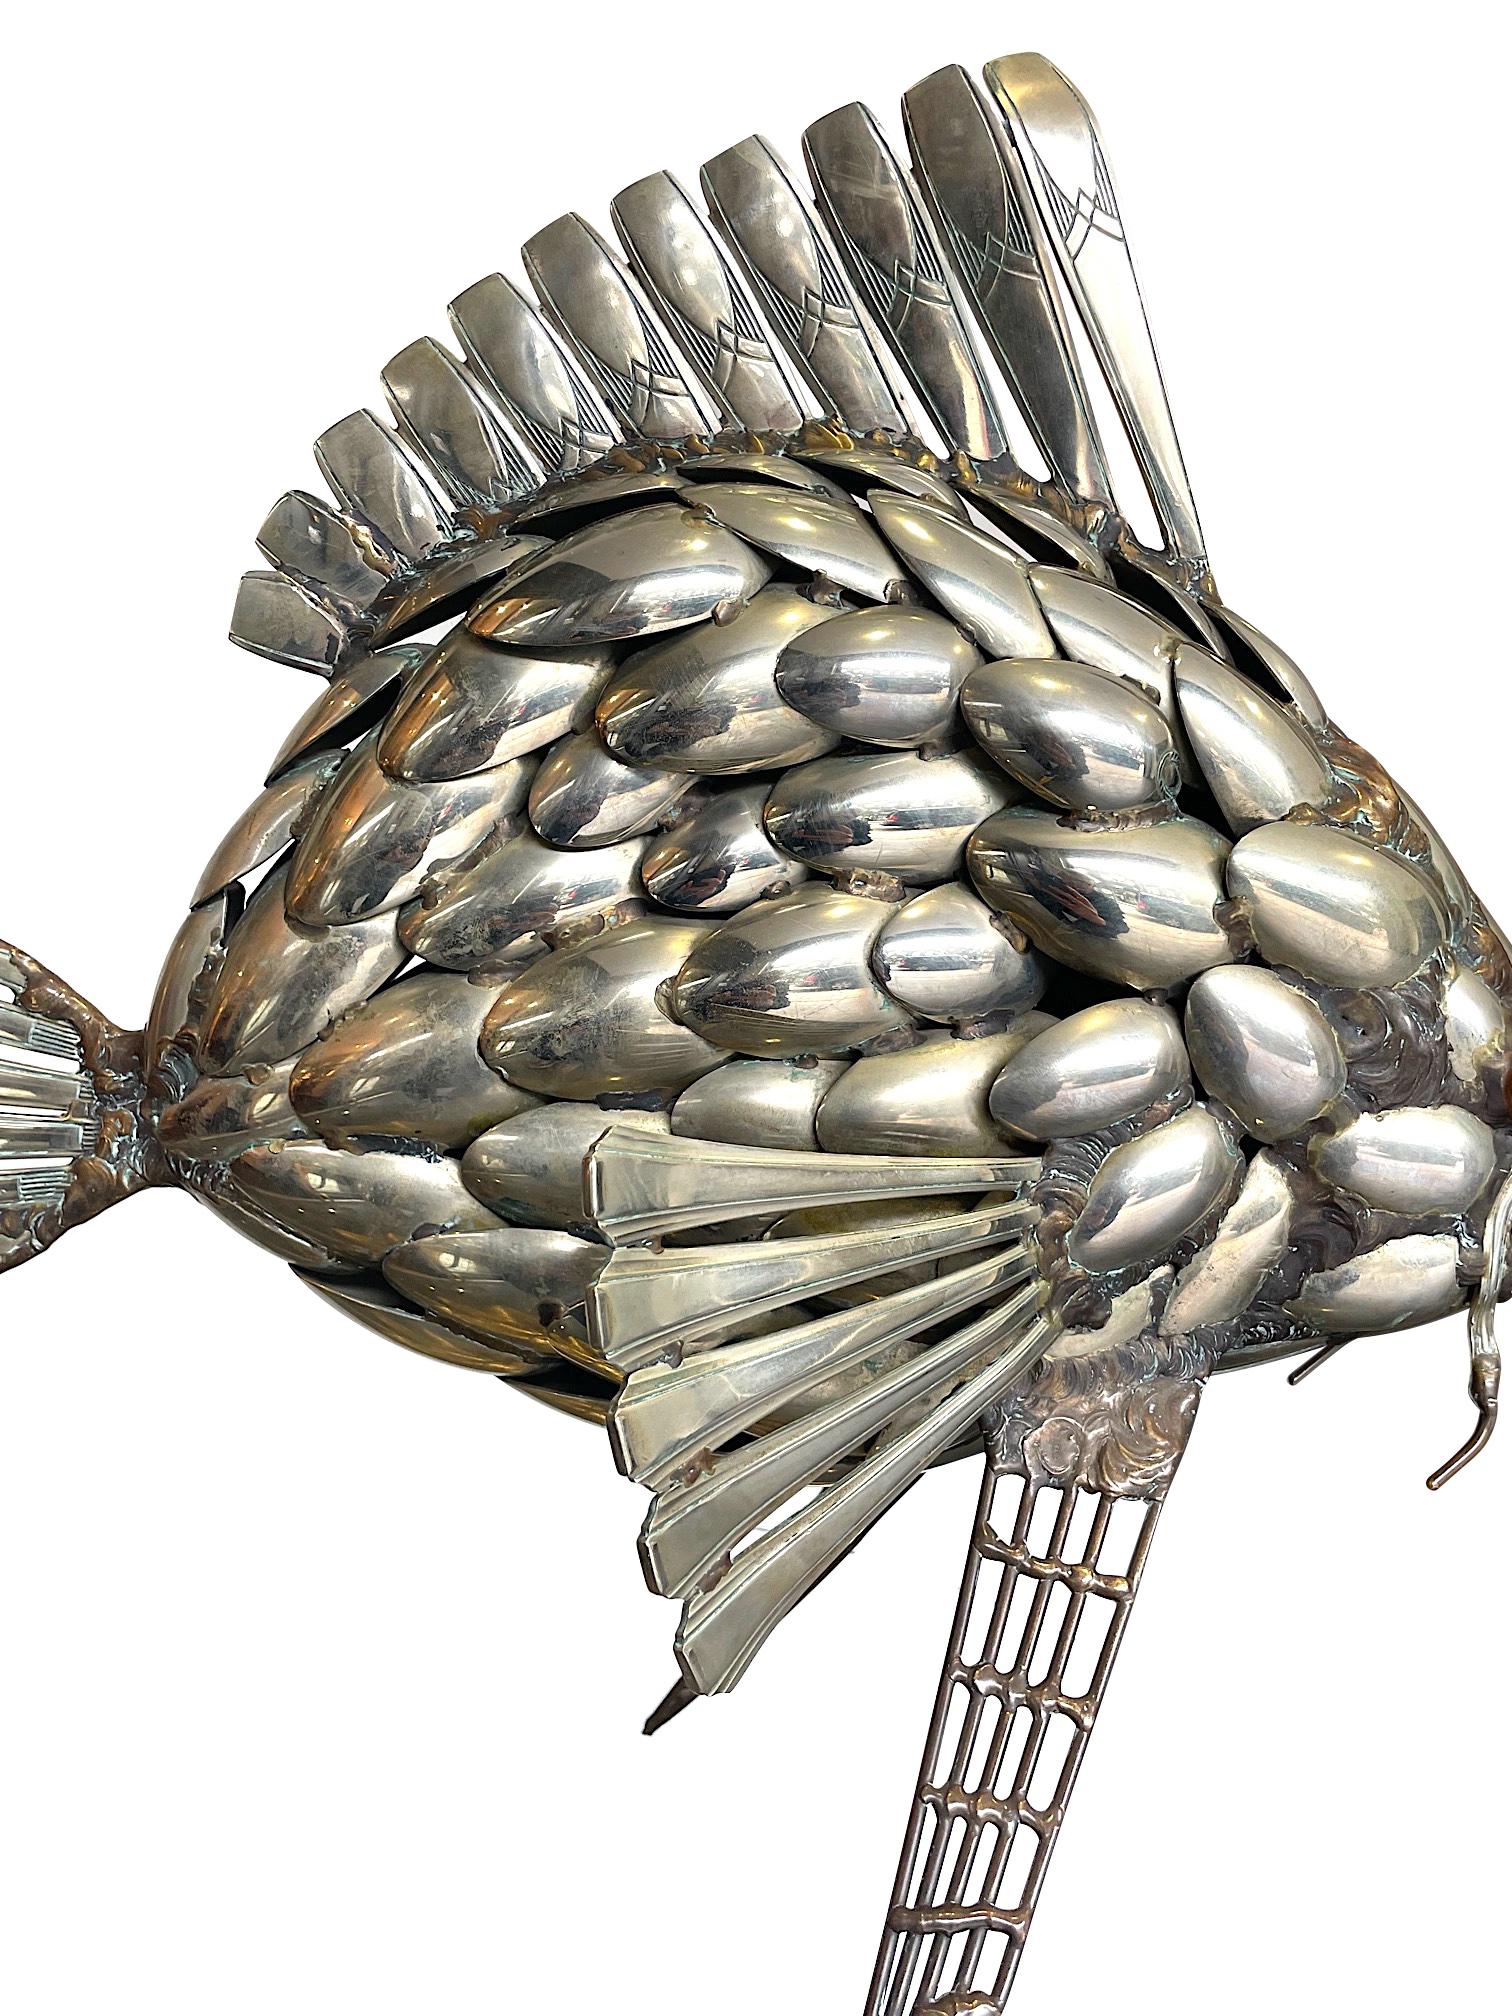 Fantastic Large 1950s Sculpture of a Fish Made from Silver Plated Spoons 7